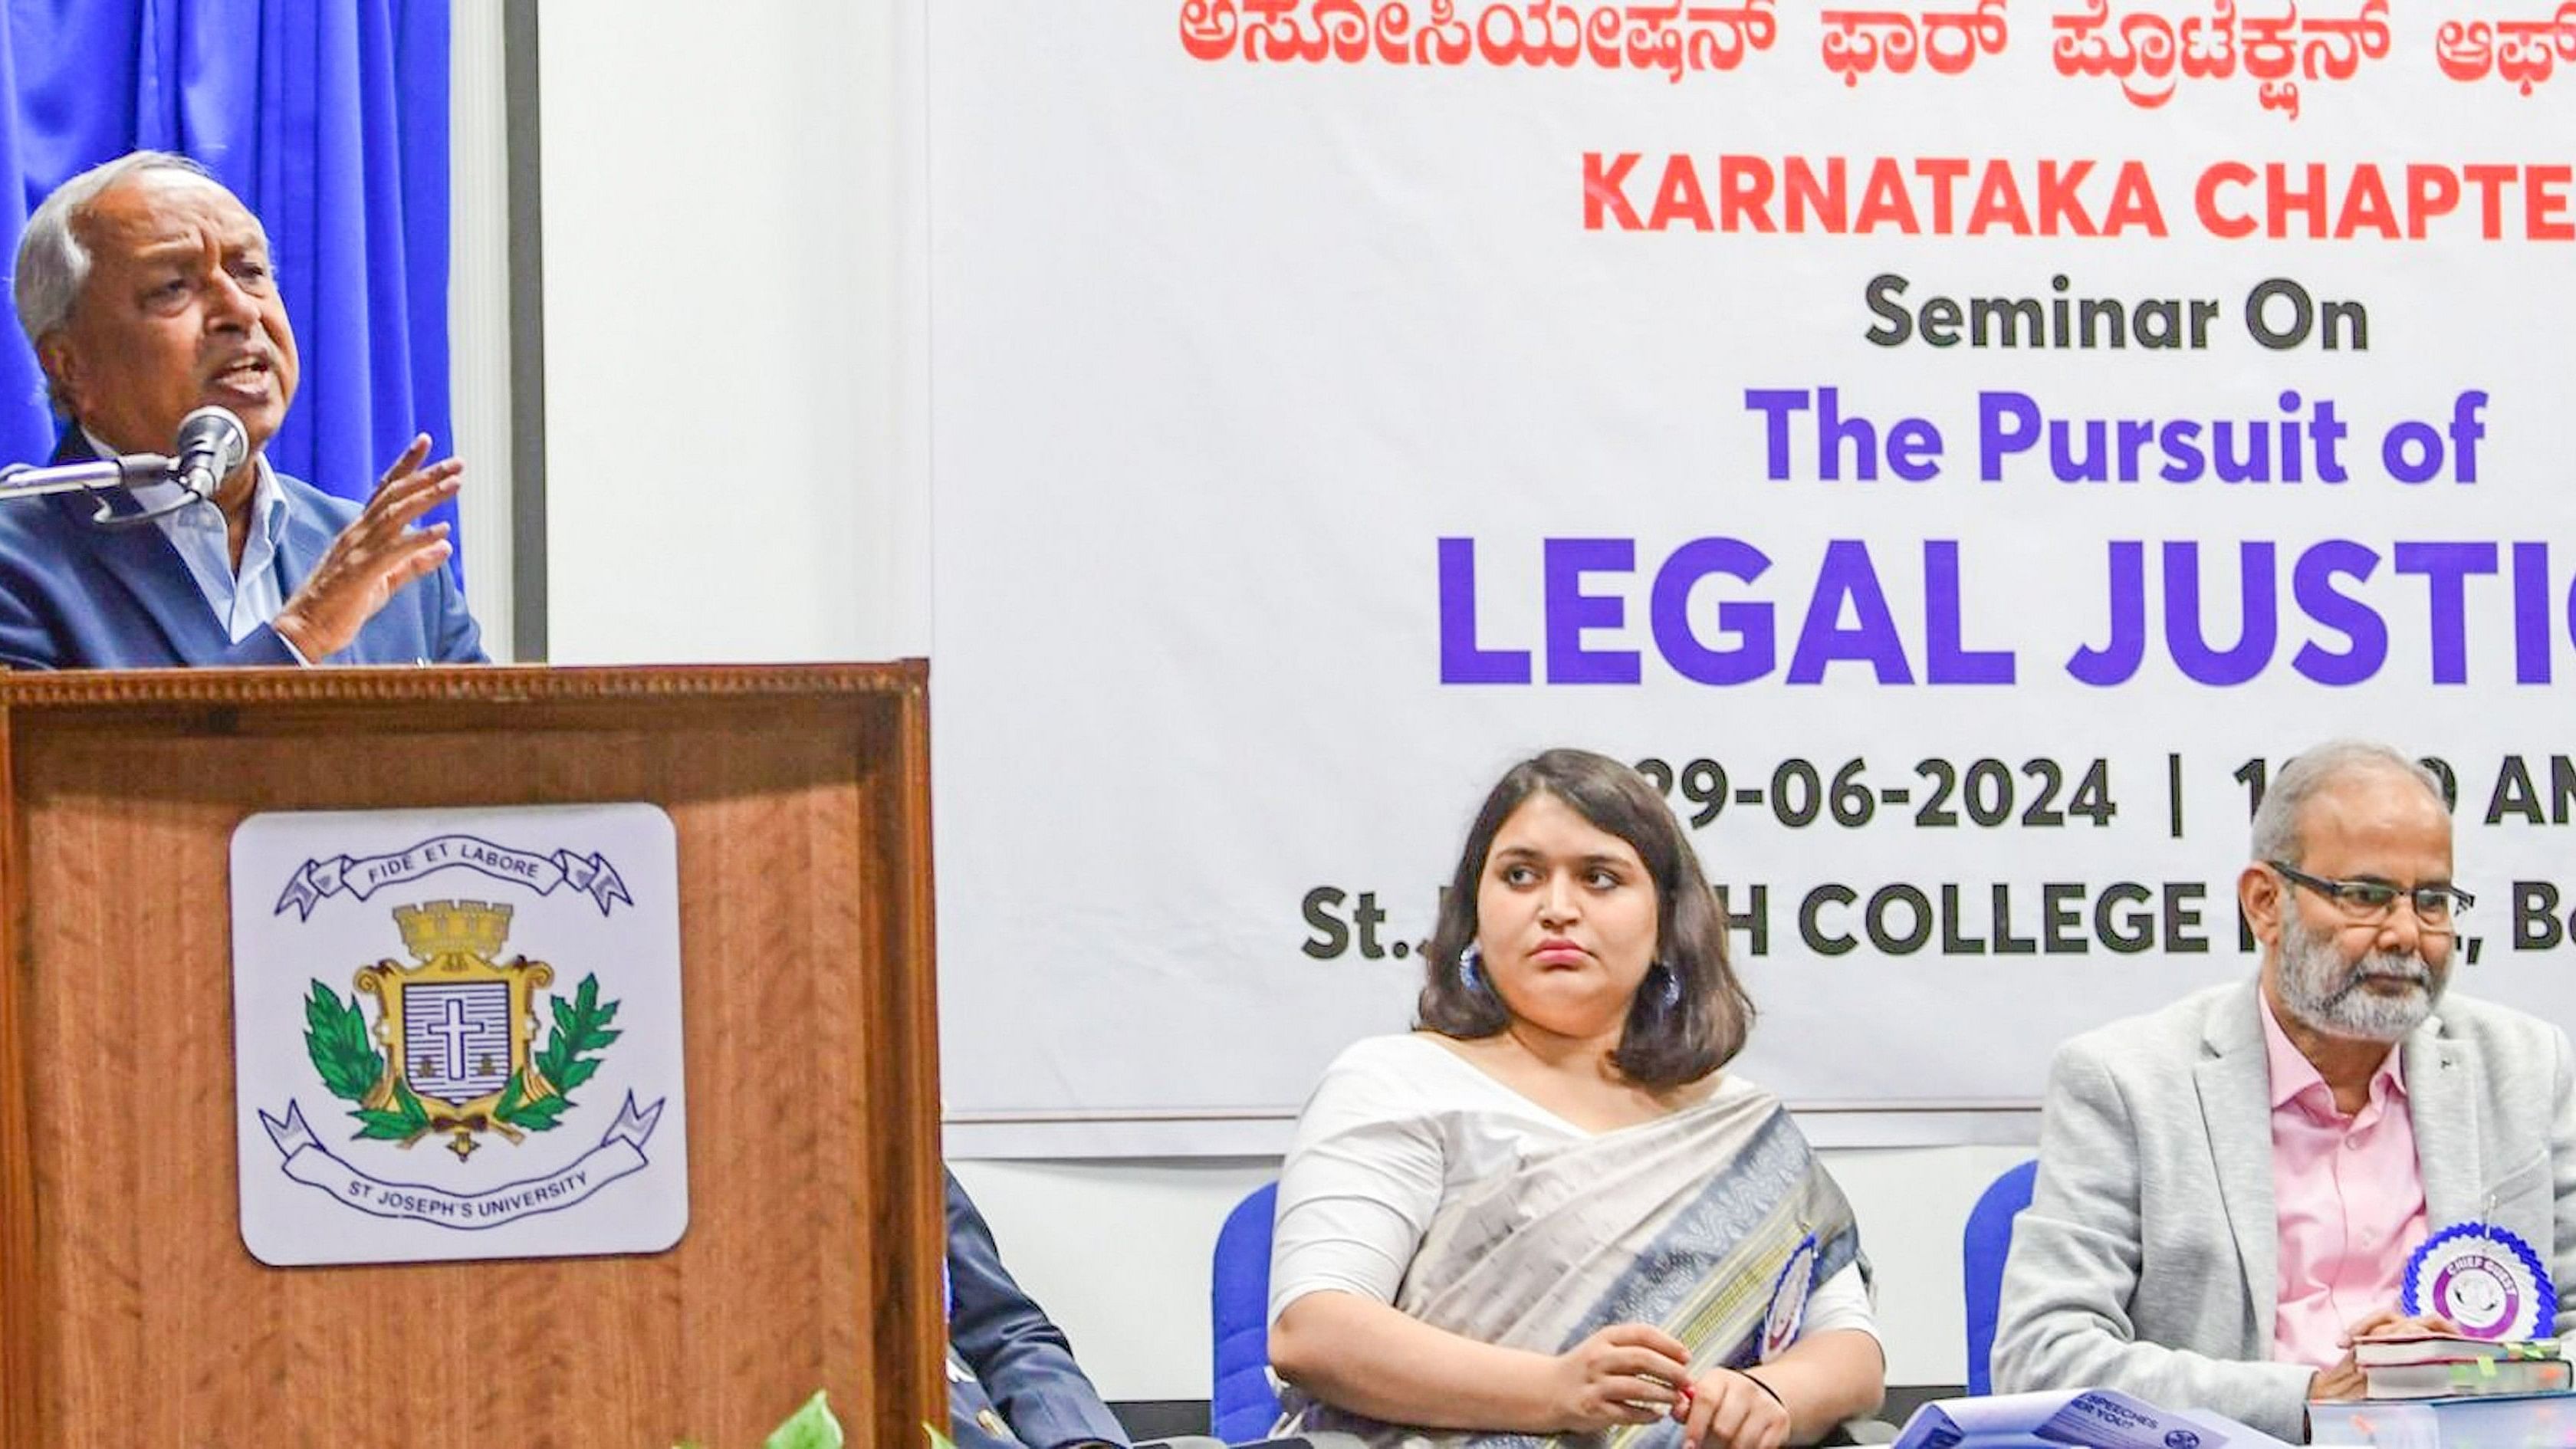 <div class="paragraphs"><p>Justice HN Nagamohan Das, former judge of the Karnataka High Court;&nbsp;Manavi Atri, human rights lawyer from People's Union for Civil Liberties (PUCL); and&nbsp;former state public prosecutor BT Venkatesh at the seminar in the city. </p></div>